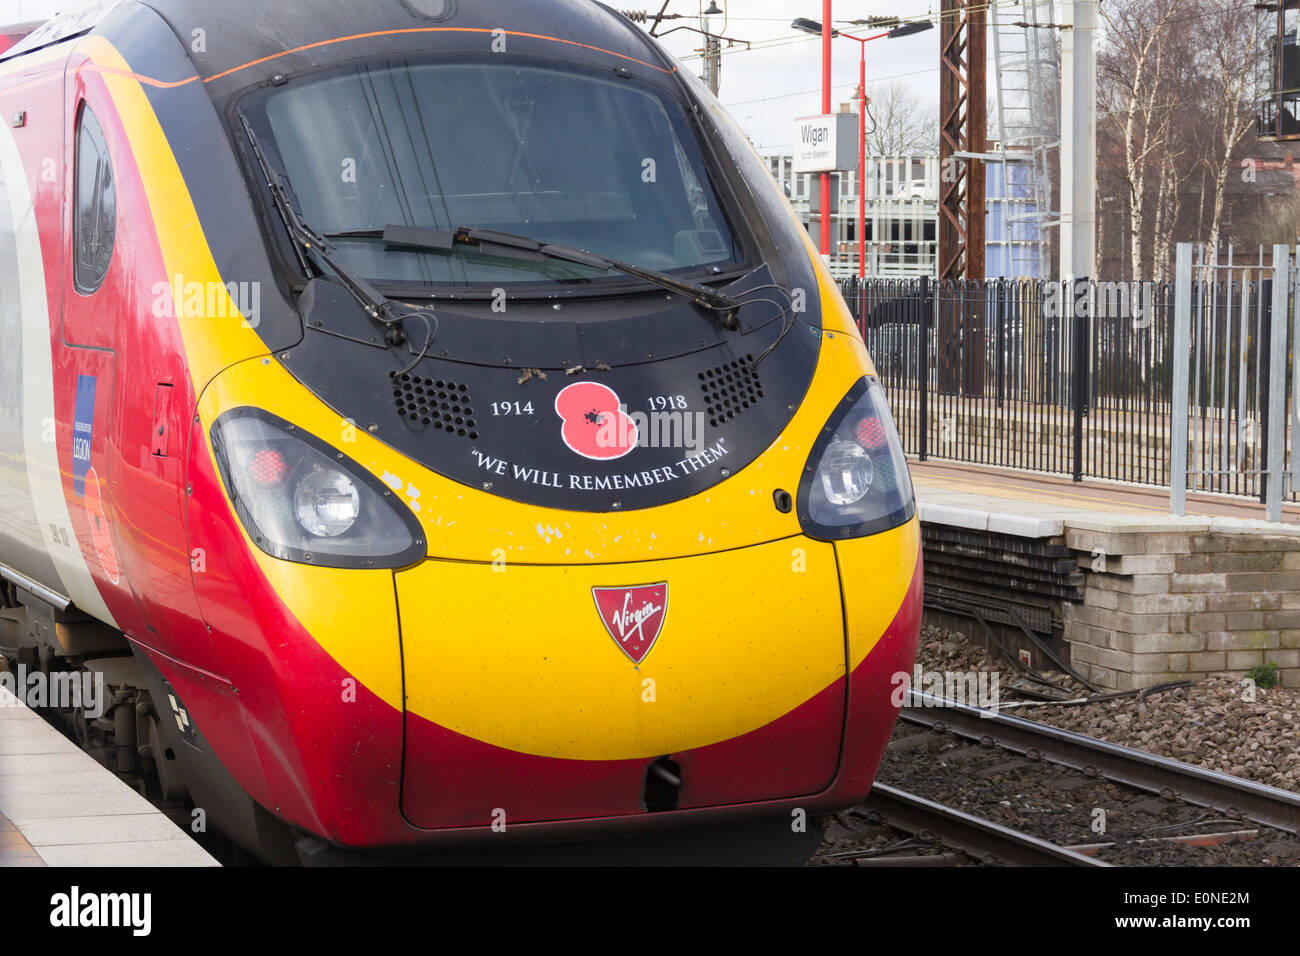 Virgin class 390 Pendolino train, 390 103 'Virgin Hero' in Remembrance livery honouring the dead of the first world war. Stock Photo